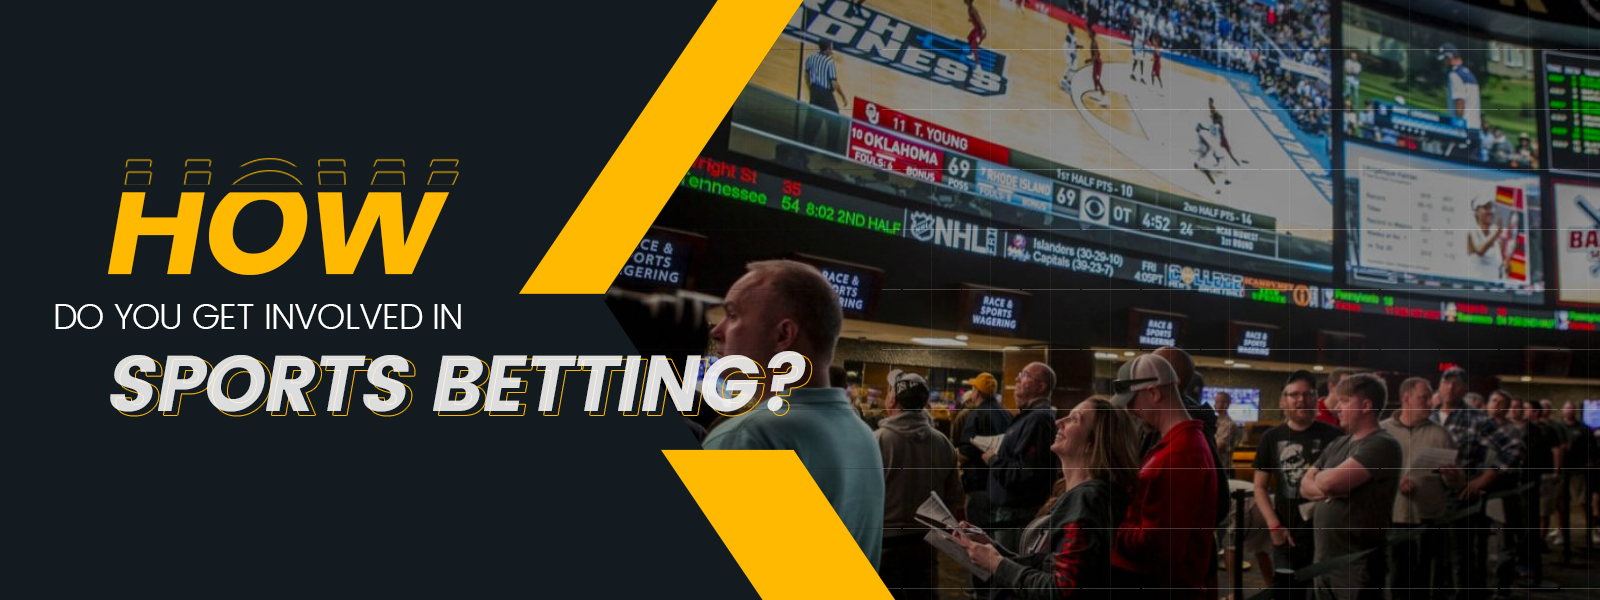 How Do You Get Involved In Sports Betting?